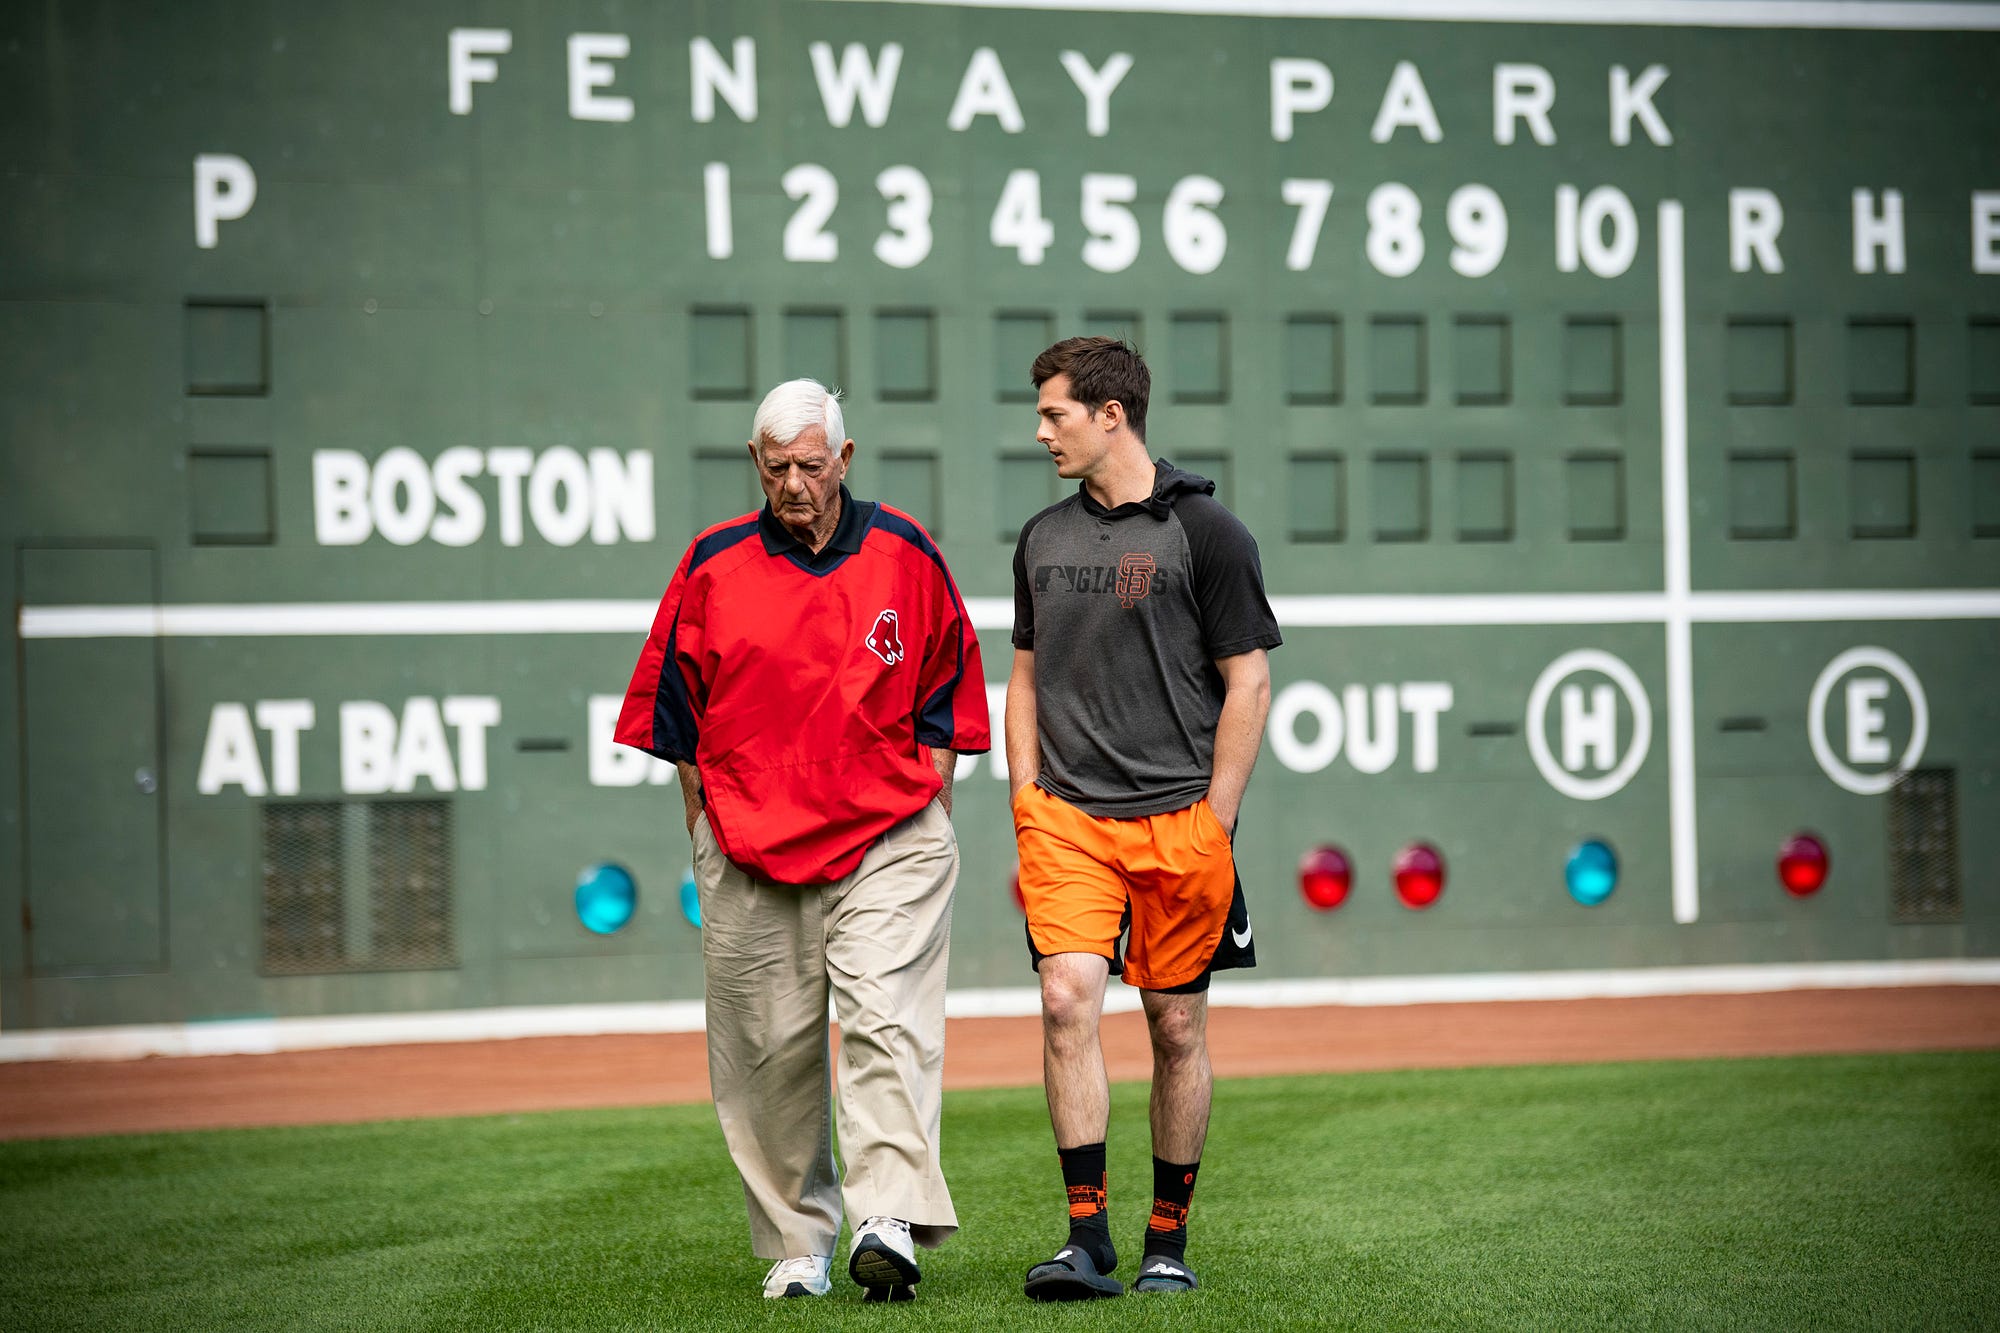 Red Sox legend Carl Yastrzemski throws out first pitch to grandson